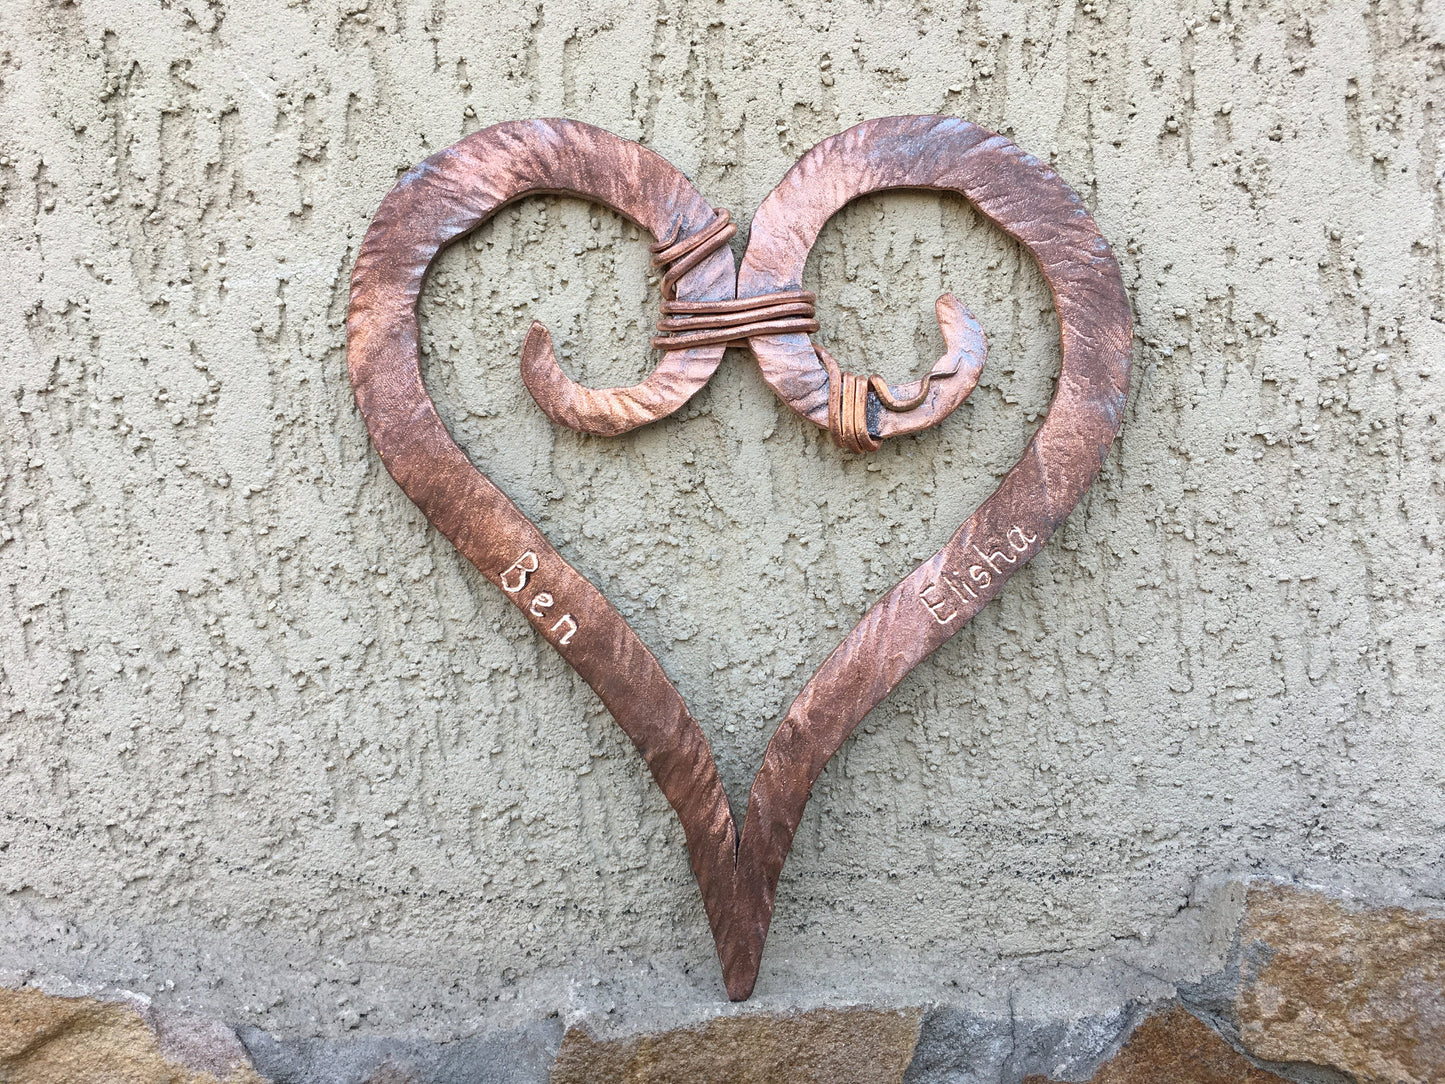 Copper gift for her, copper gift, 7 year gift, 7th anniversary gift, copper anniversary gift, copper heart, copper gifts, copper wedding